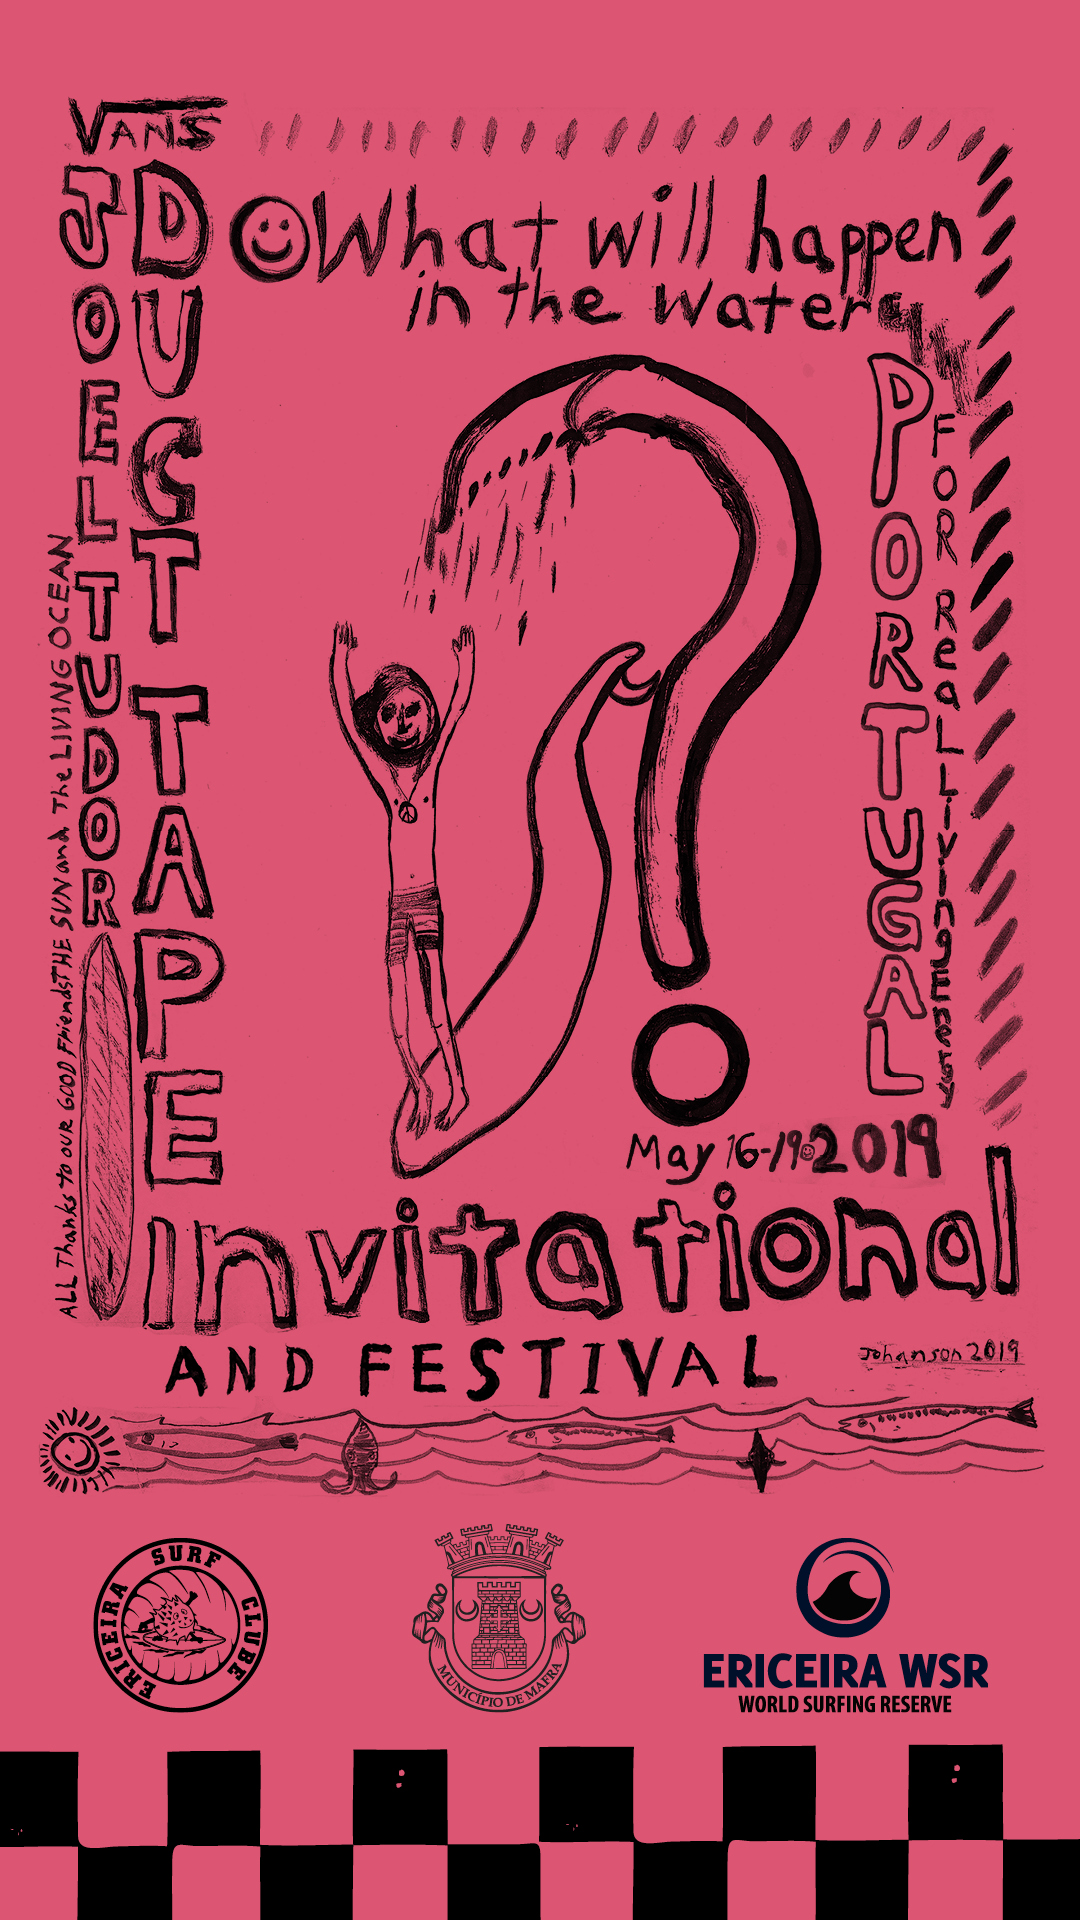 The Vans Joel Tudor Duct Tape Invitational and Surf Festival Travels to Ericeira, Portugal May 16-19 Joel Tudor’s Iconic Longboard Contest Honours Creativity and Innovation in Surfing